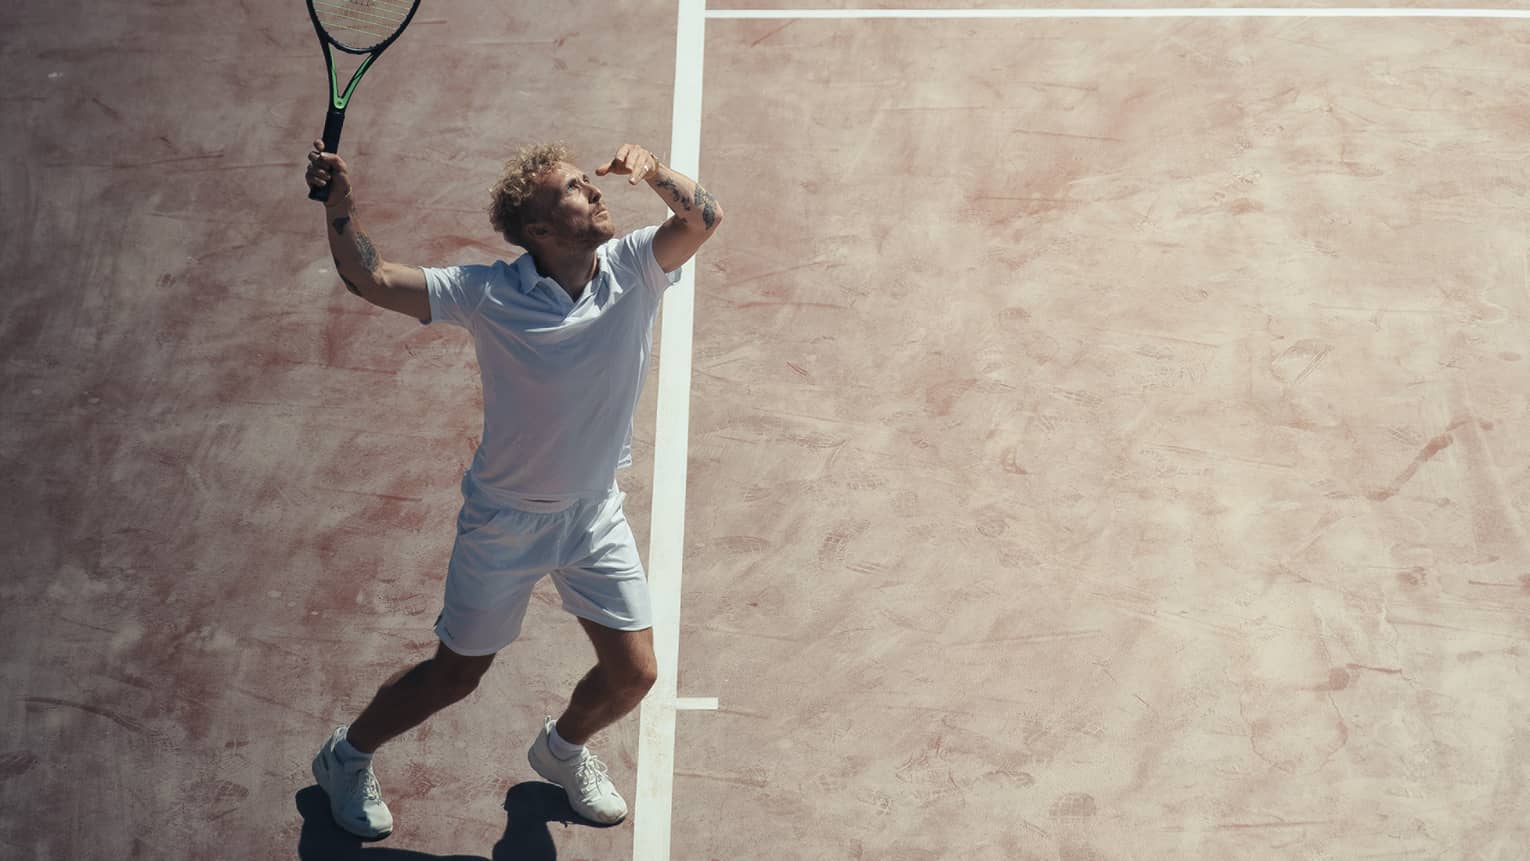 Man in white outfit playing tennis on reddish clay court